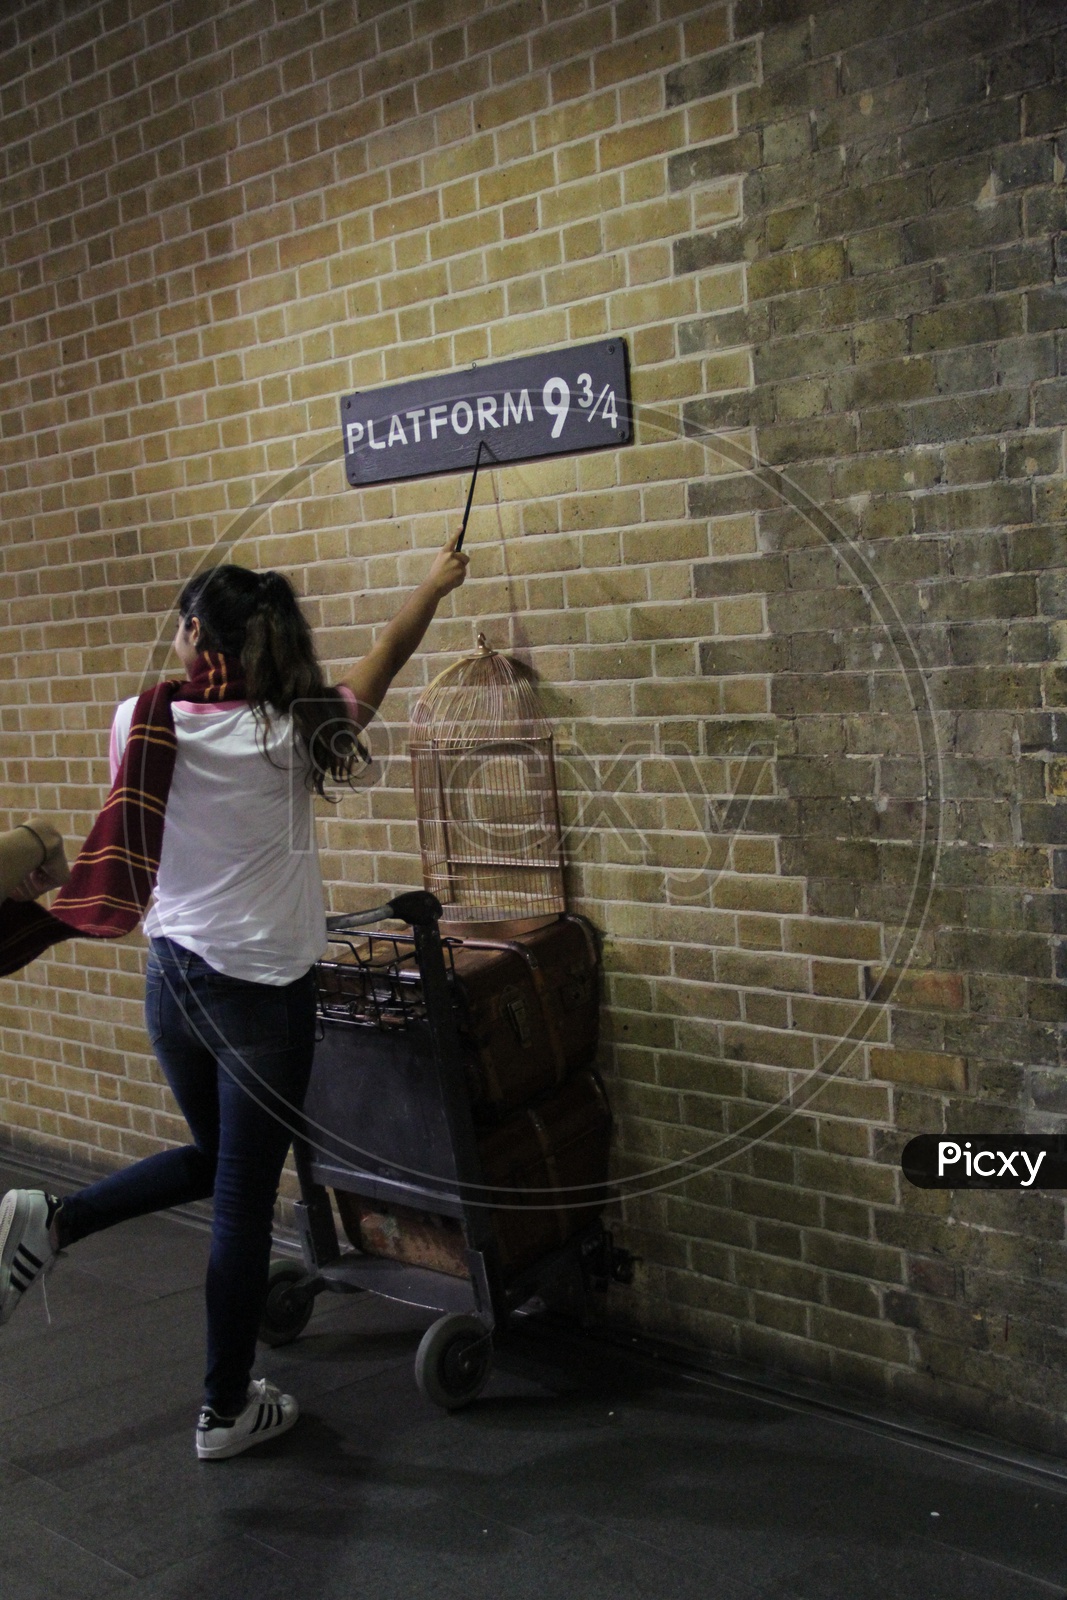 Young Woman with Magic wand  Pointing at Platform 9 3/4 Sign from Harry Potter movie in King's Cross Station